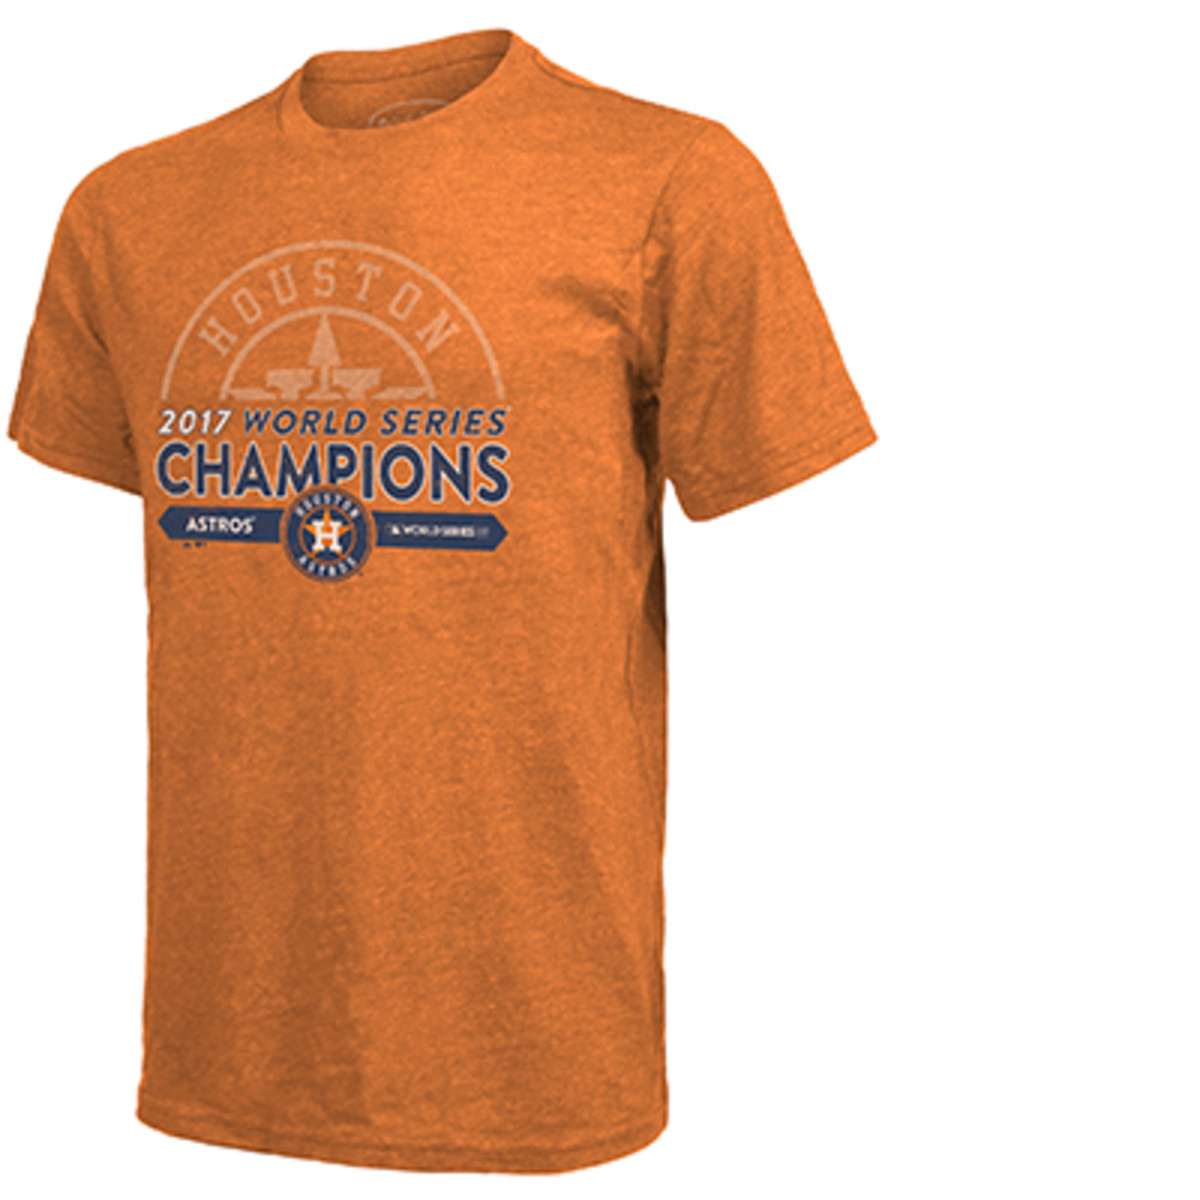 Astros gift guide: Commemorative issue, covers, gear - Sports